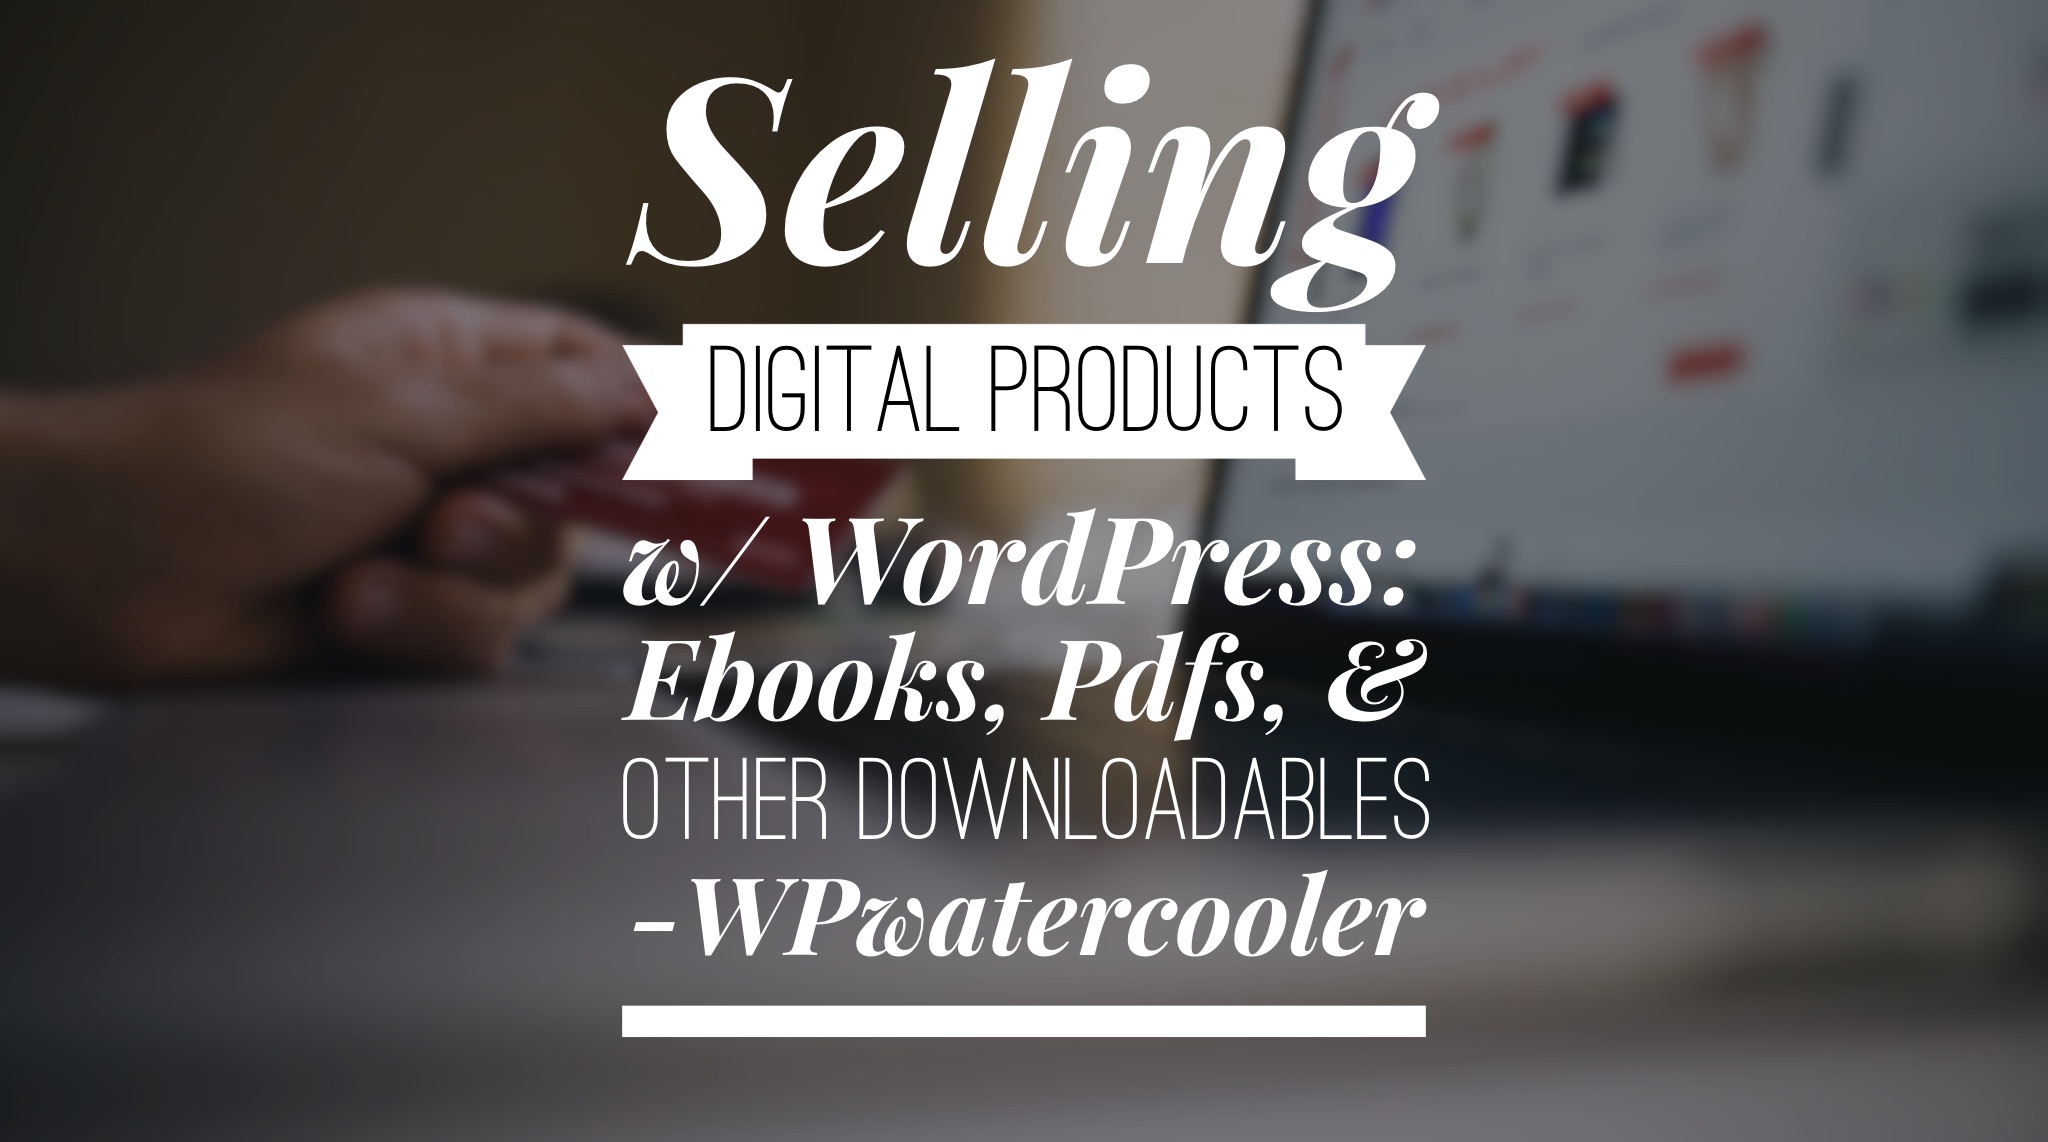 EP254 – Selling Digital Products w/ WordPress: Ebooks, PDFs, & Other Downloadables